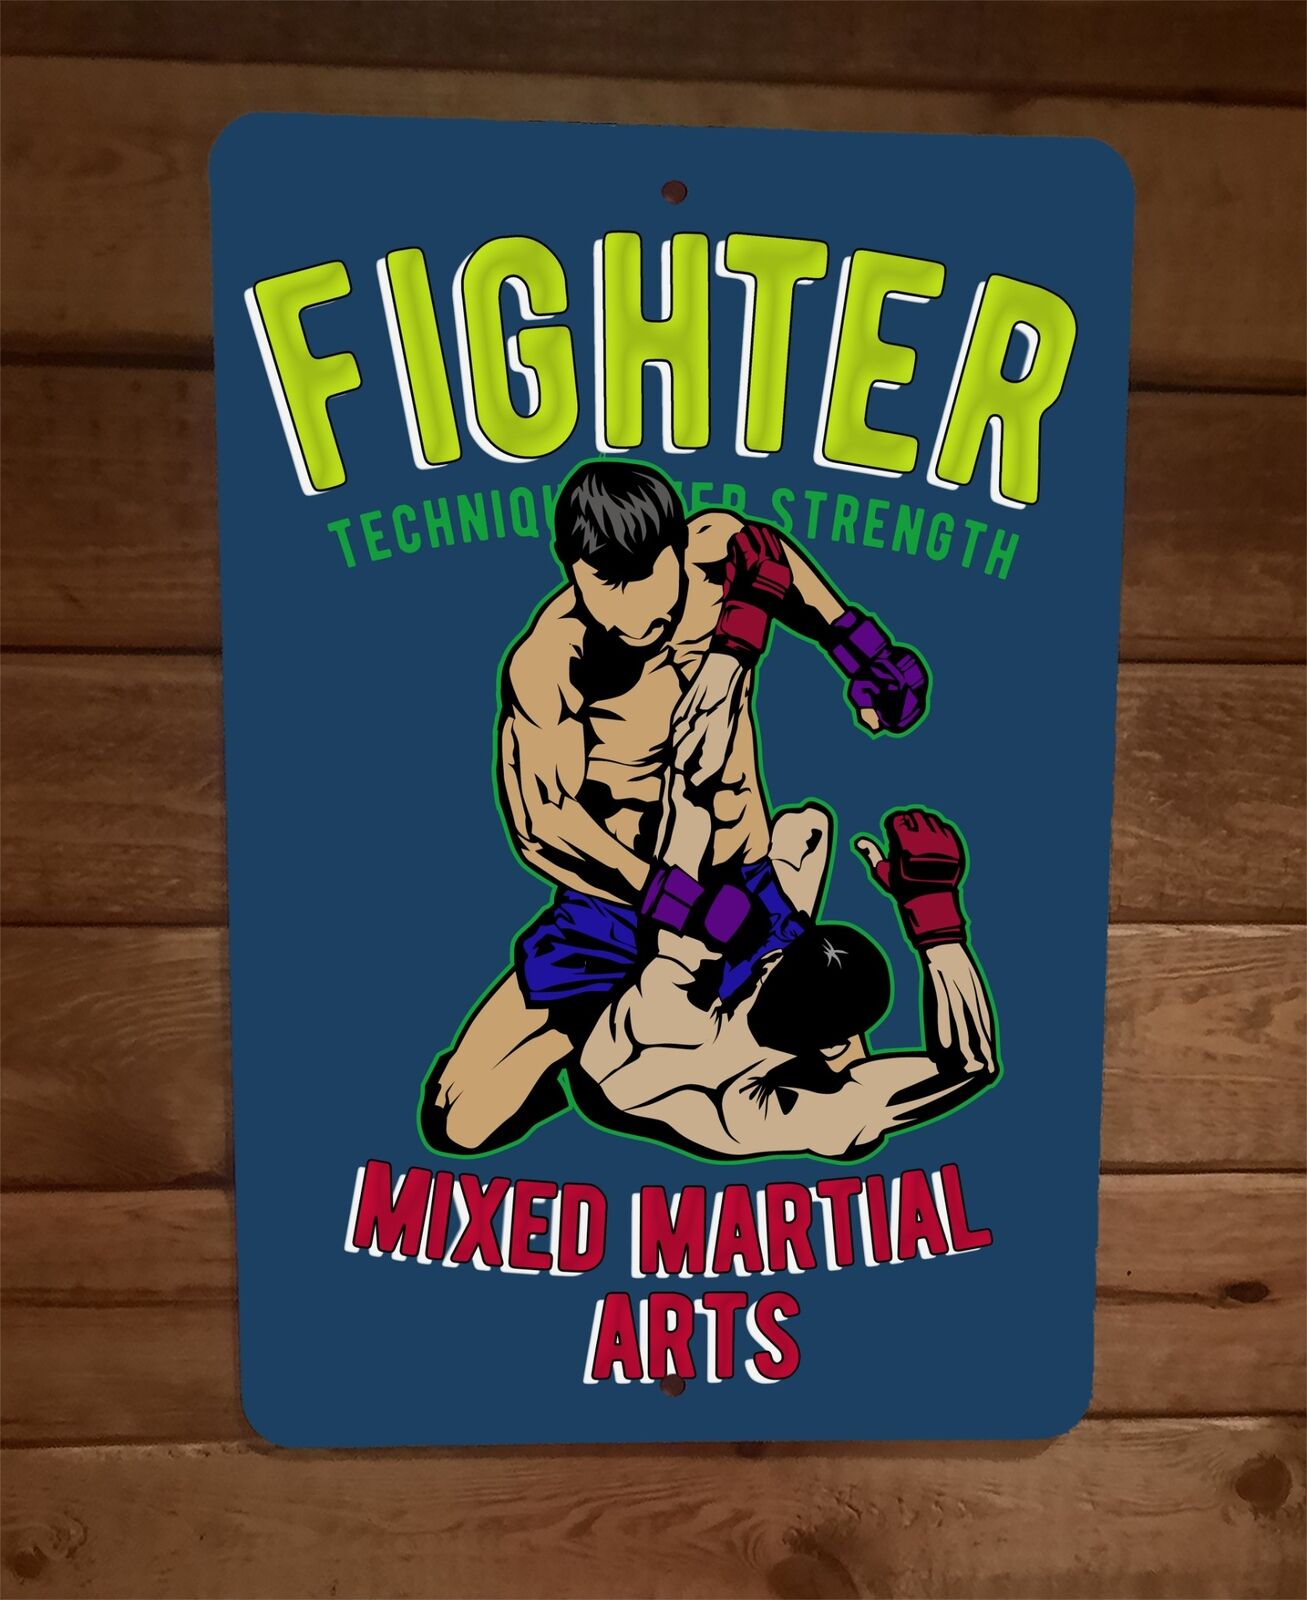 MMA Mixed Martial Arts Fighter Sports 8x12 Metal Wall Sign Poster